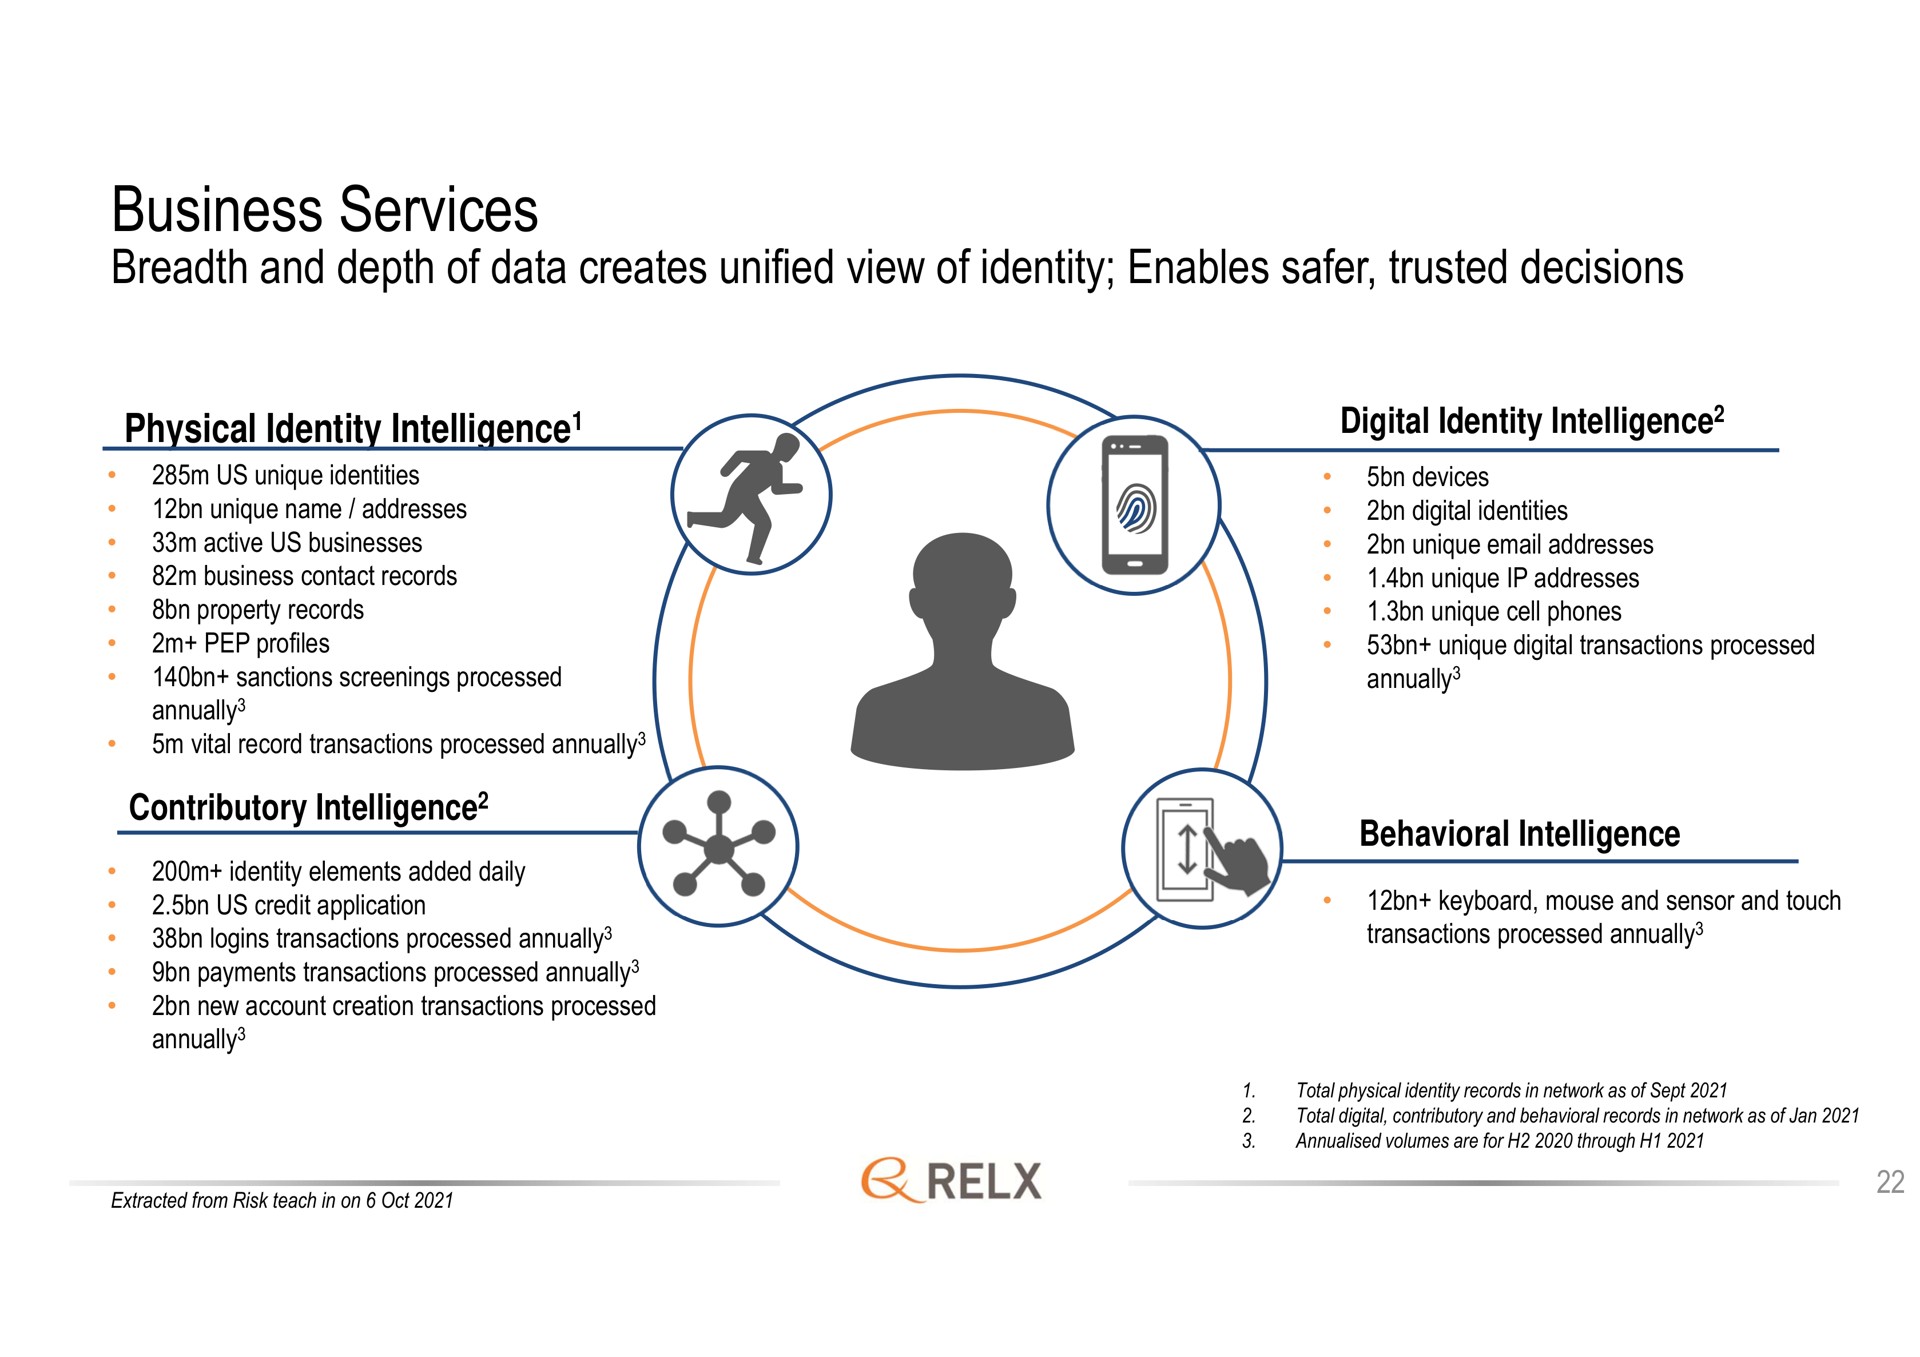 business services breadth and depth of data creates unified view of identity enables trusted decisions behavioral intelligence | RELX